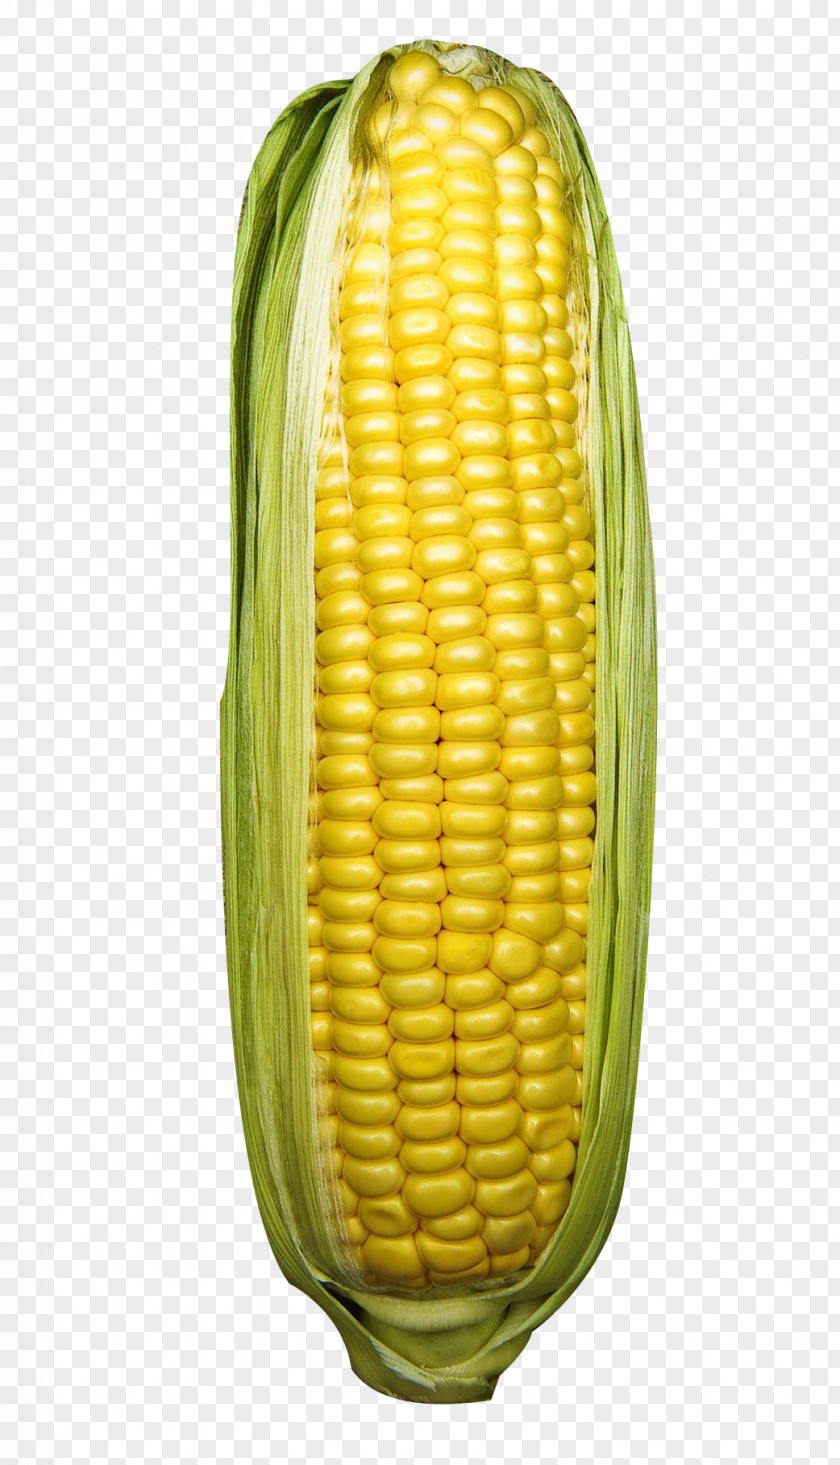 Corn On The Cob Kernel Sweet Commodity Fruit PNG